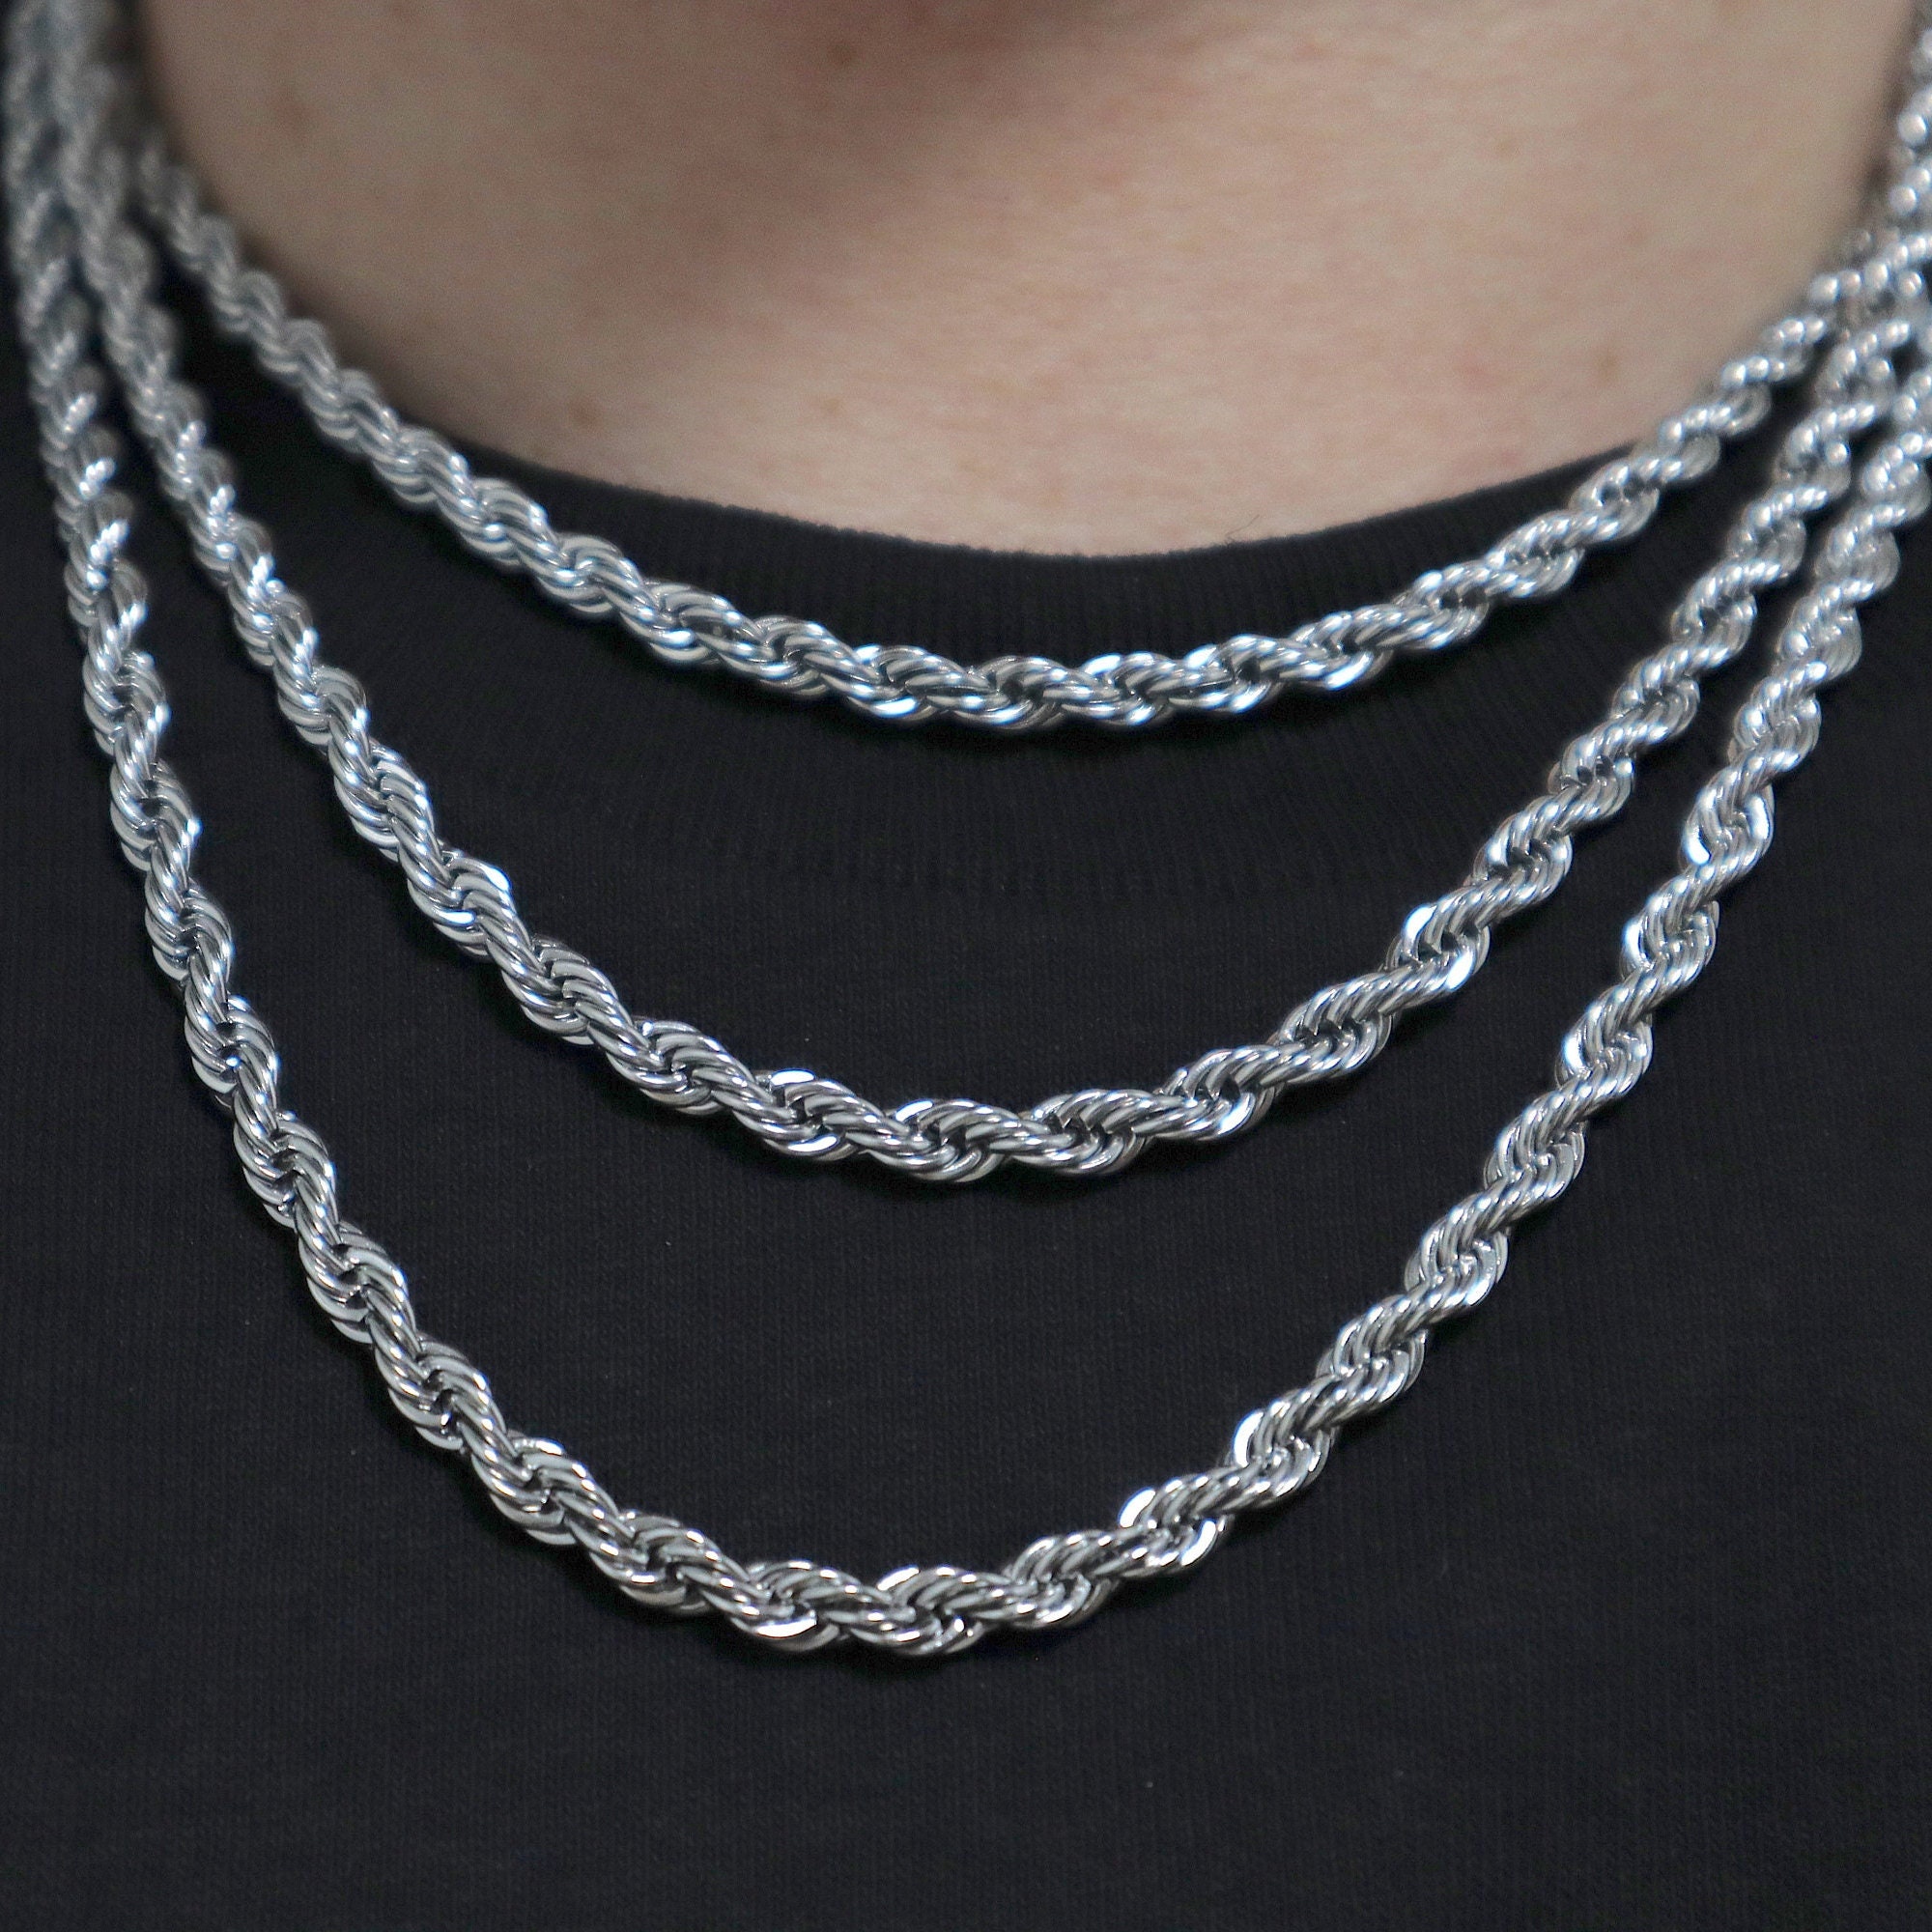 5mm Rope Chain Necklace Silver Stainless Steel 18 20 22 Inch -  Canada